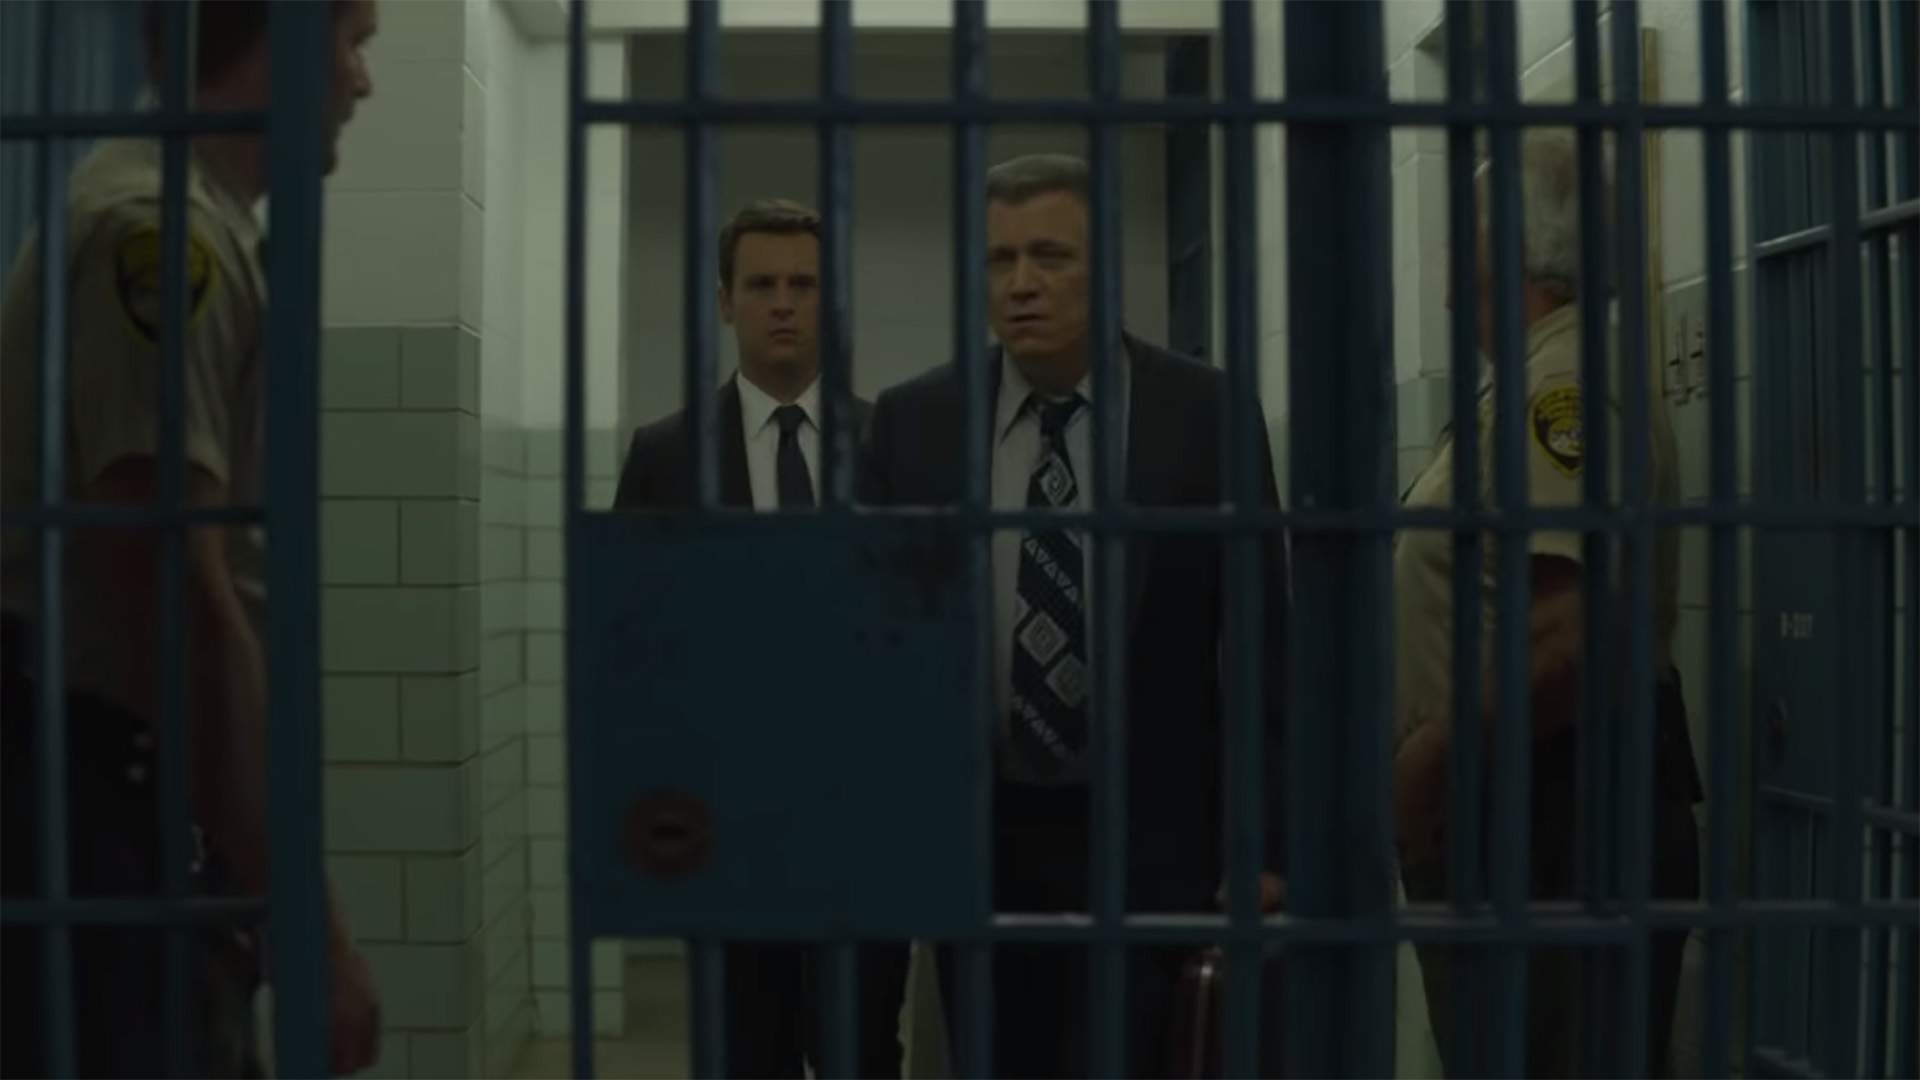 The Menacing First Trailer for 'Mindhunter' Season Two Has Creepy Masks and Charles Manson